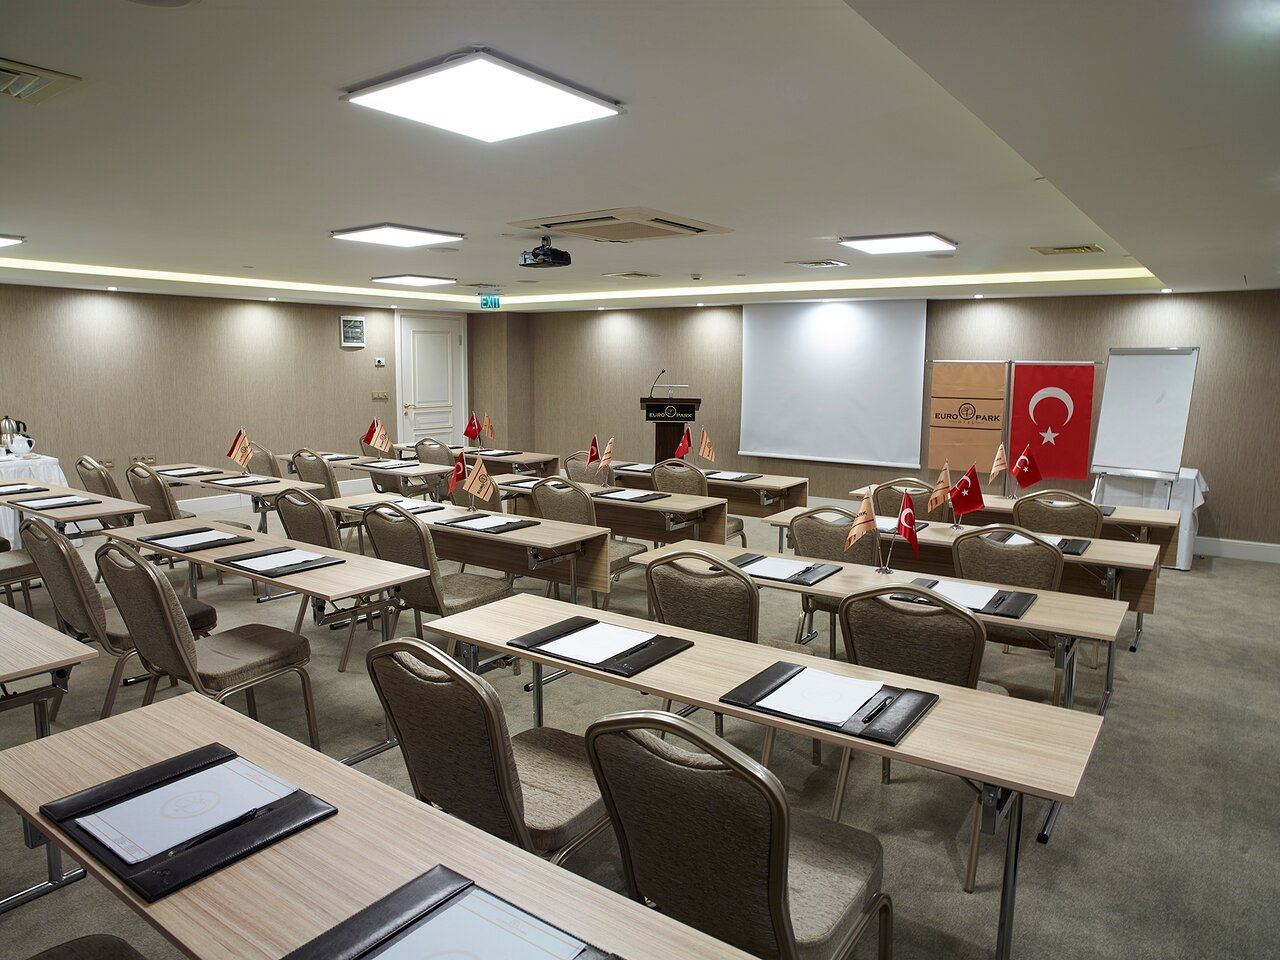 Türkiye to transfer pupils from quake-hit provinces to other schools